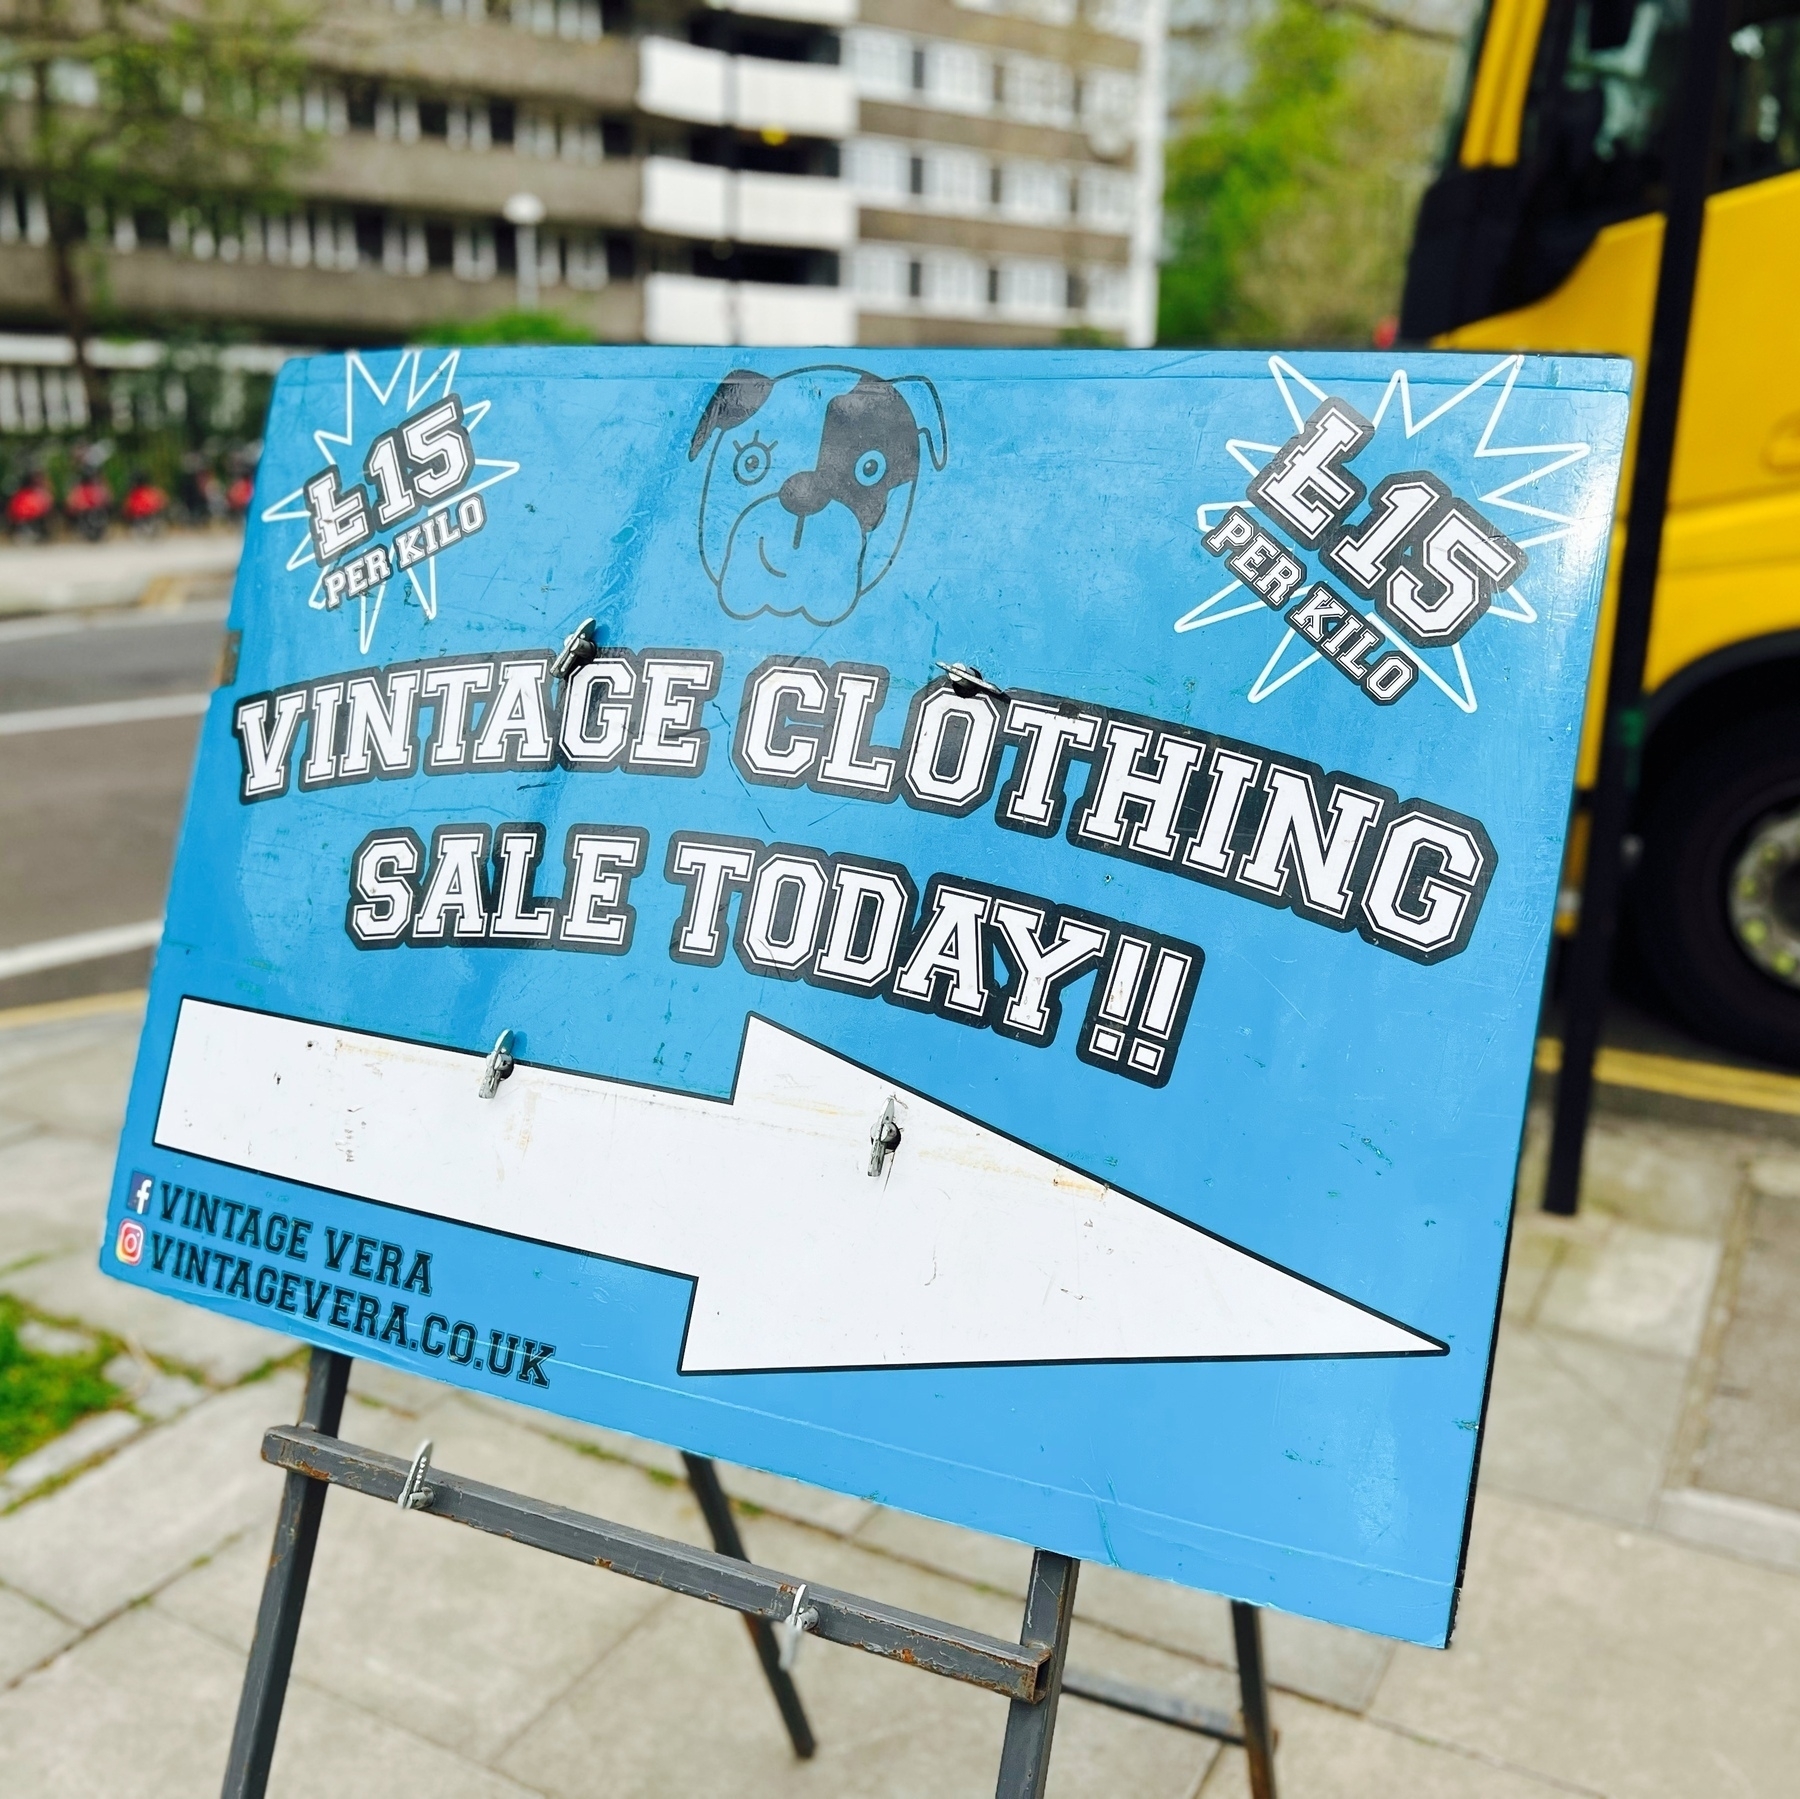 A vintage clothes by the kilo sign near Northampton Square, London